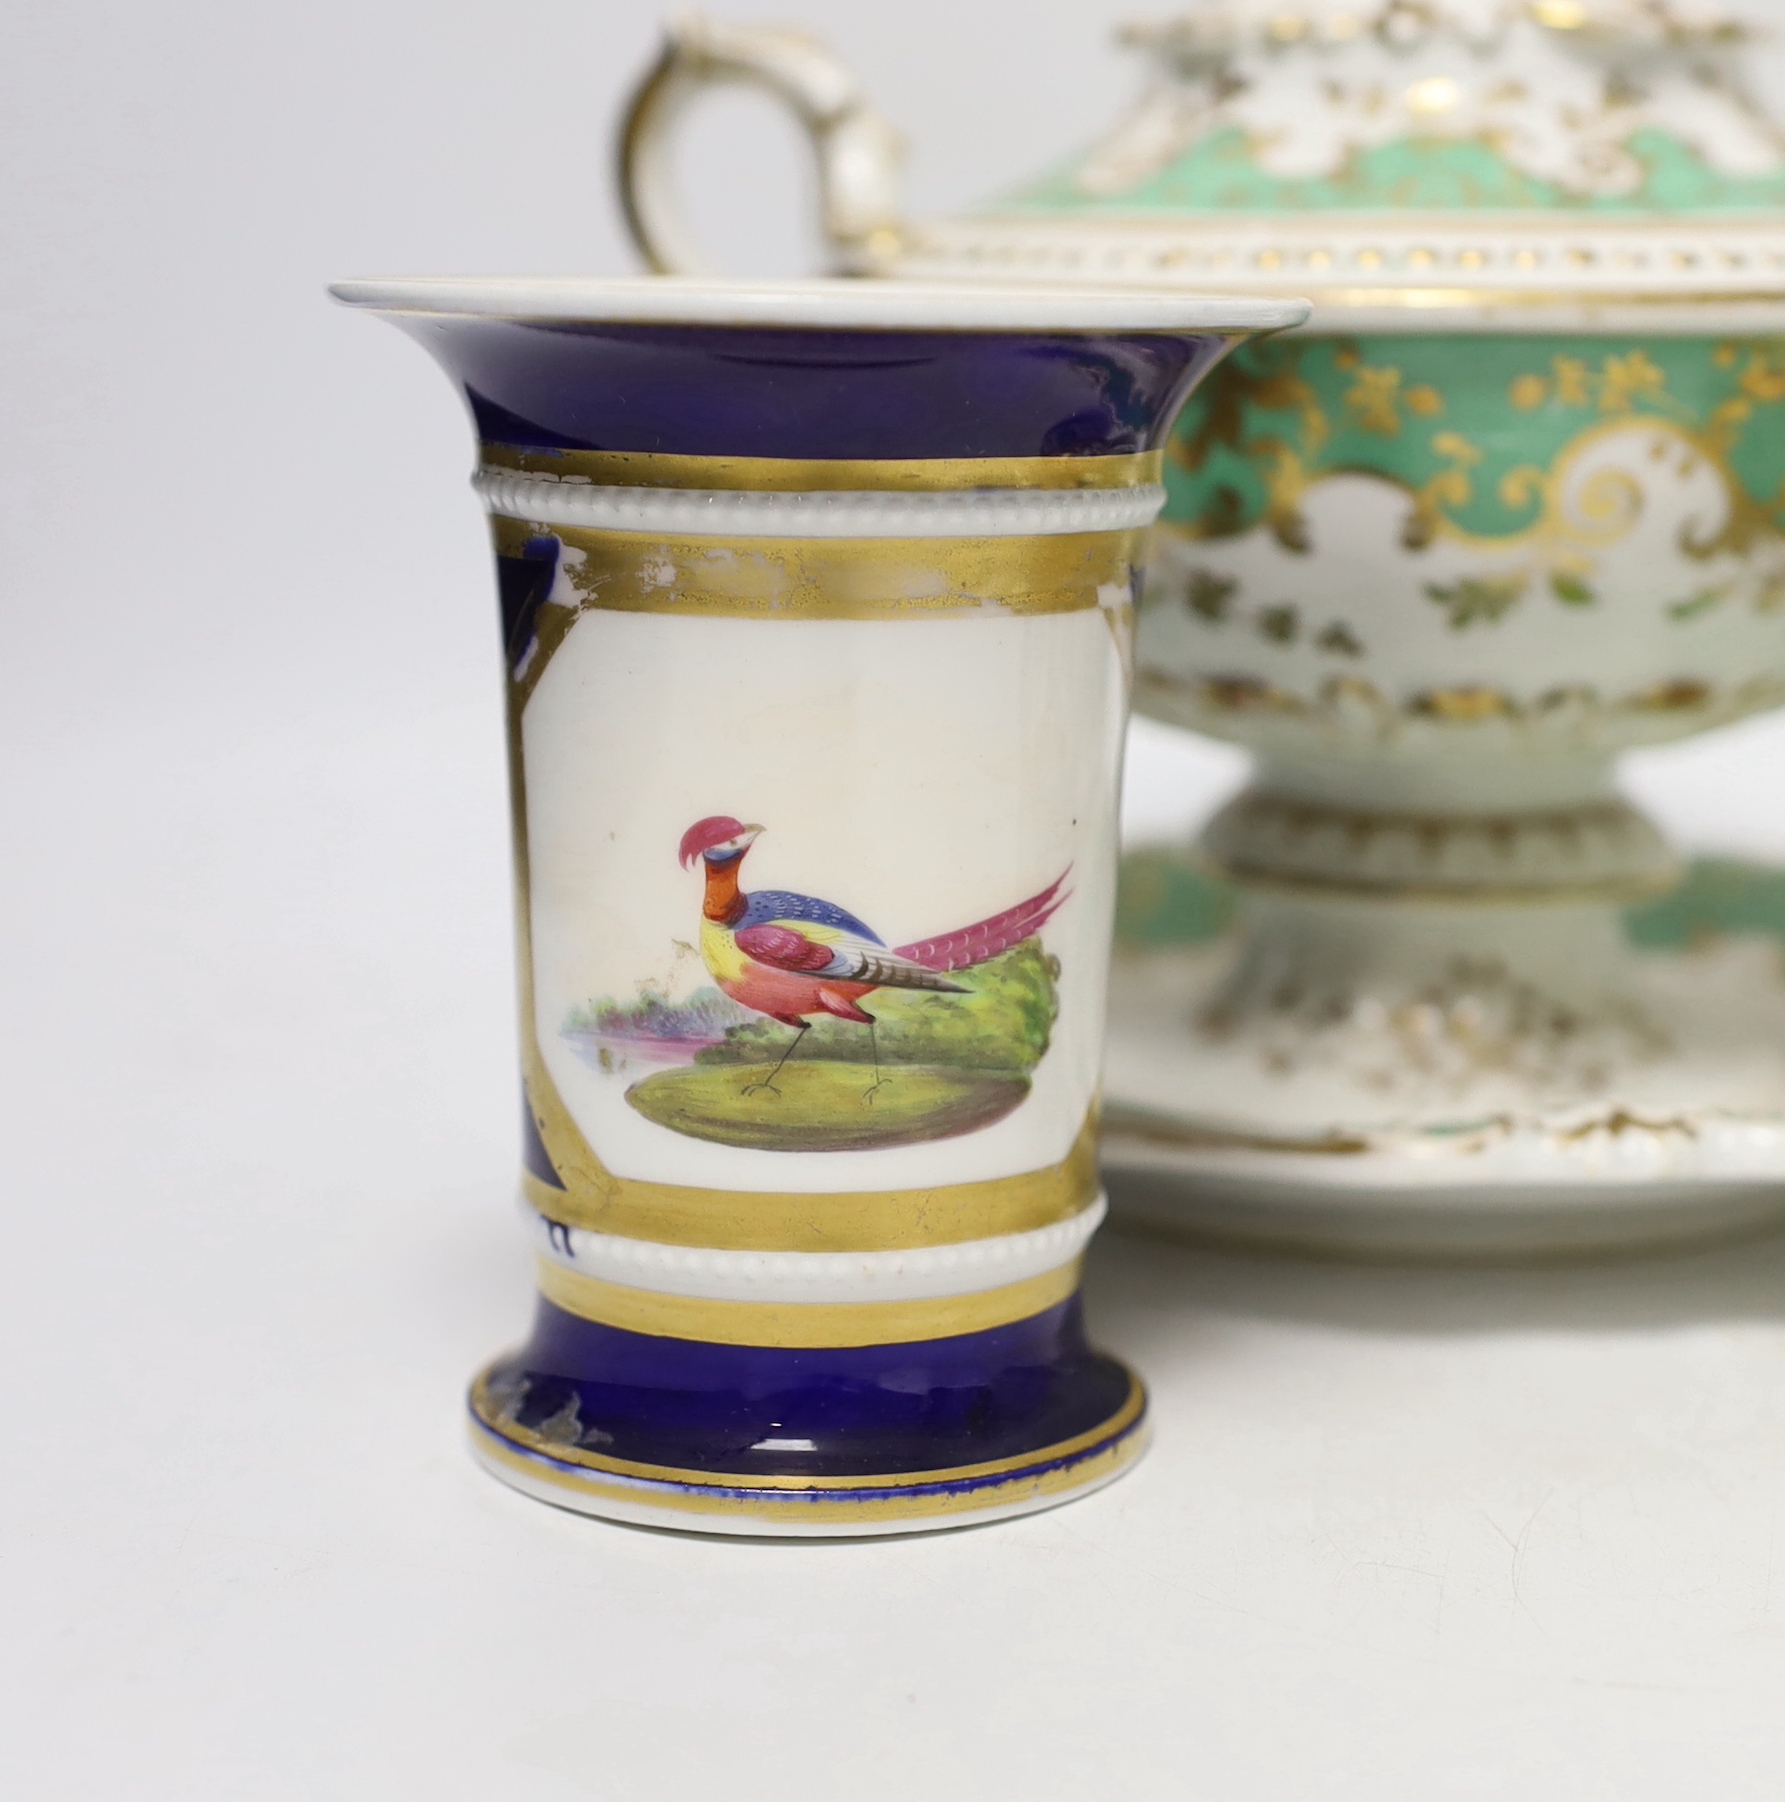 Early 19th century English porcelain including a Wedgwood pot pourri bowl and cover, two sauce tureens covers with integral stands, a butterfly painted trio and a bird painted spill vase